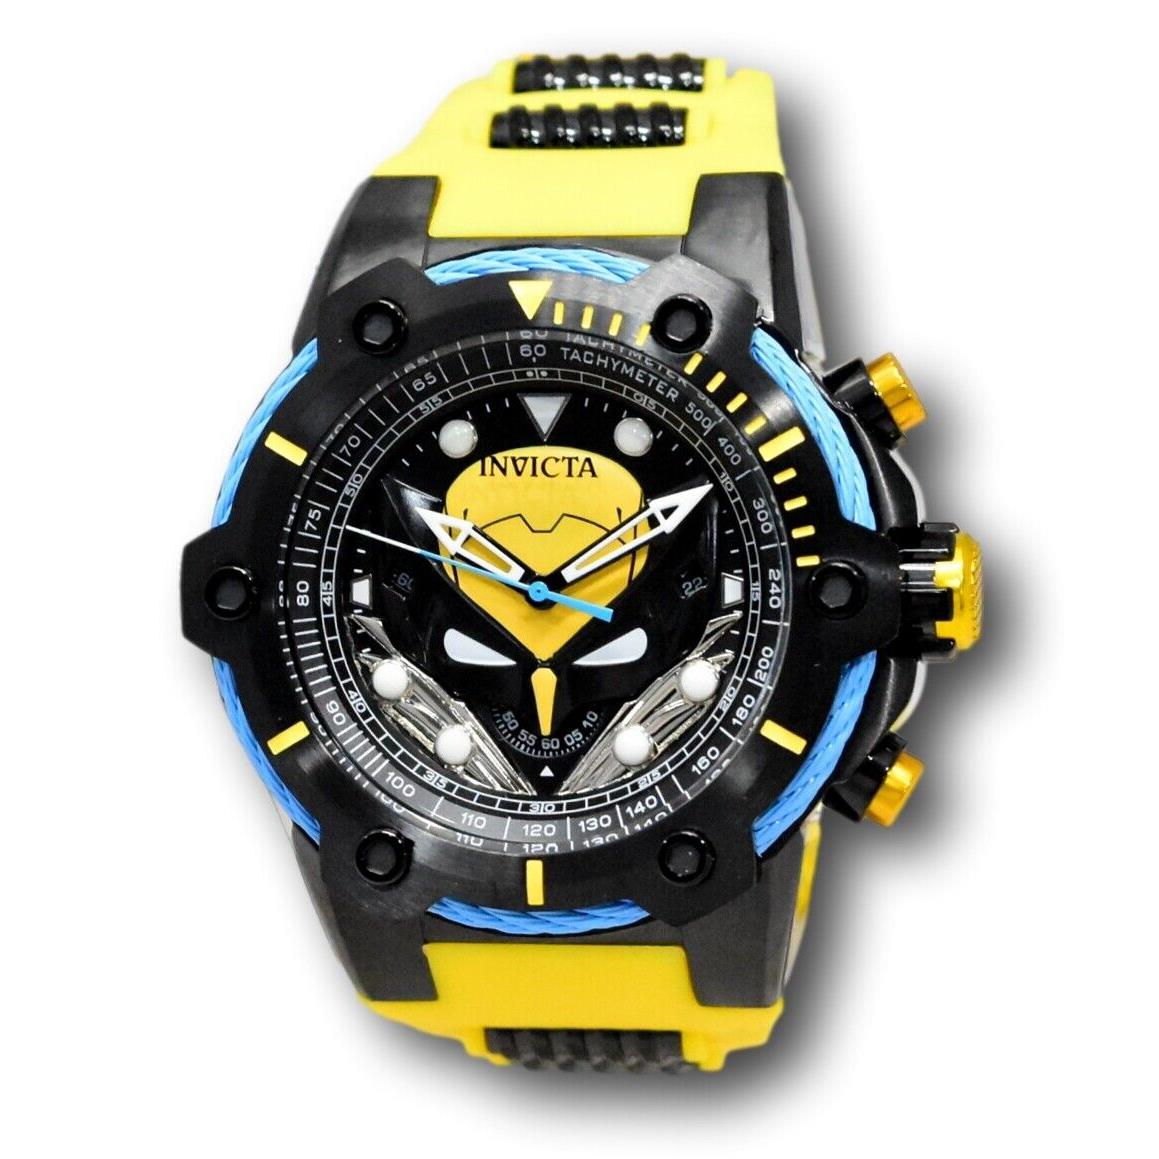 Invicta Marvel X-men Wolverine Men`s 52mm Limited Ed Chronograph Watch 43393 - Dial: Black, Multicolor, Silver, White, Yellow, Band: Black, Yellow, Bezel: Black, Blue, Yellow